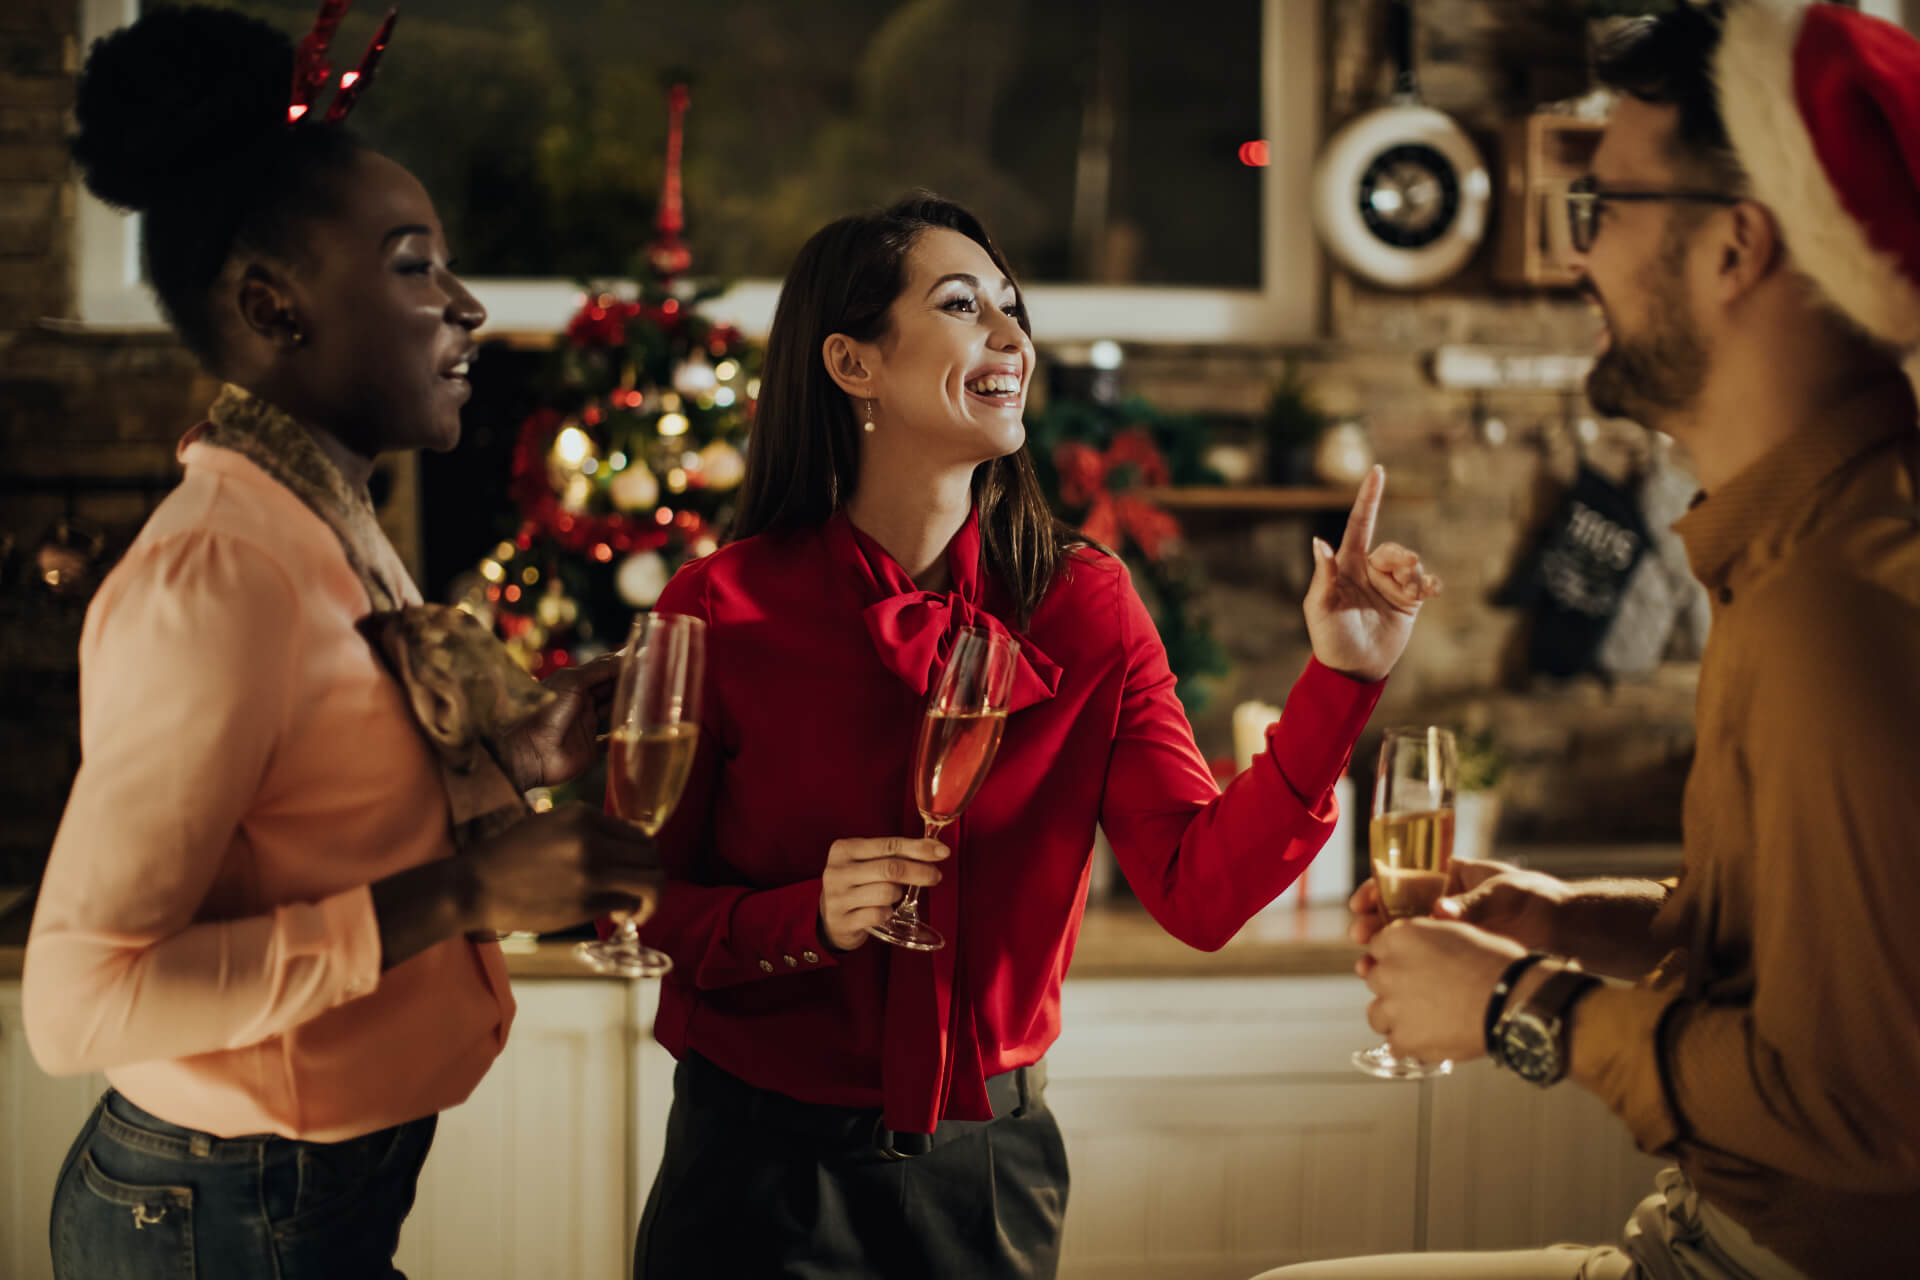 From traditional to modern: 6 ideas for your Viennese Christmas party in 2023.